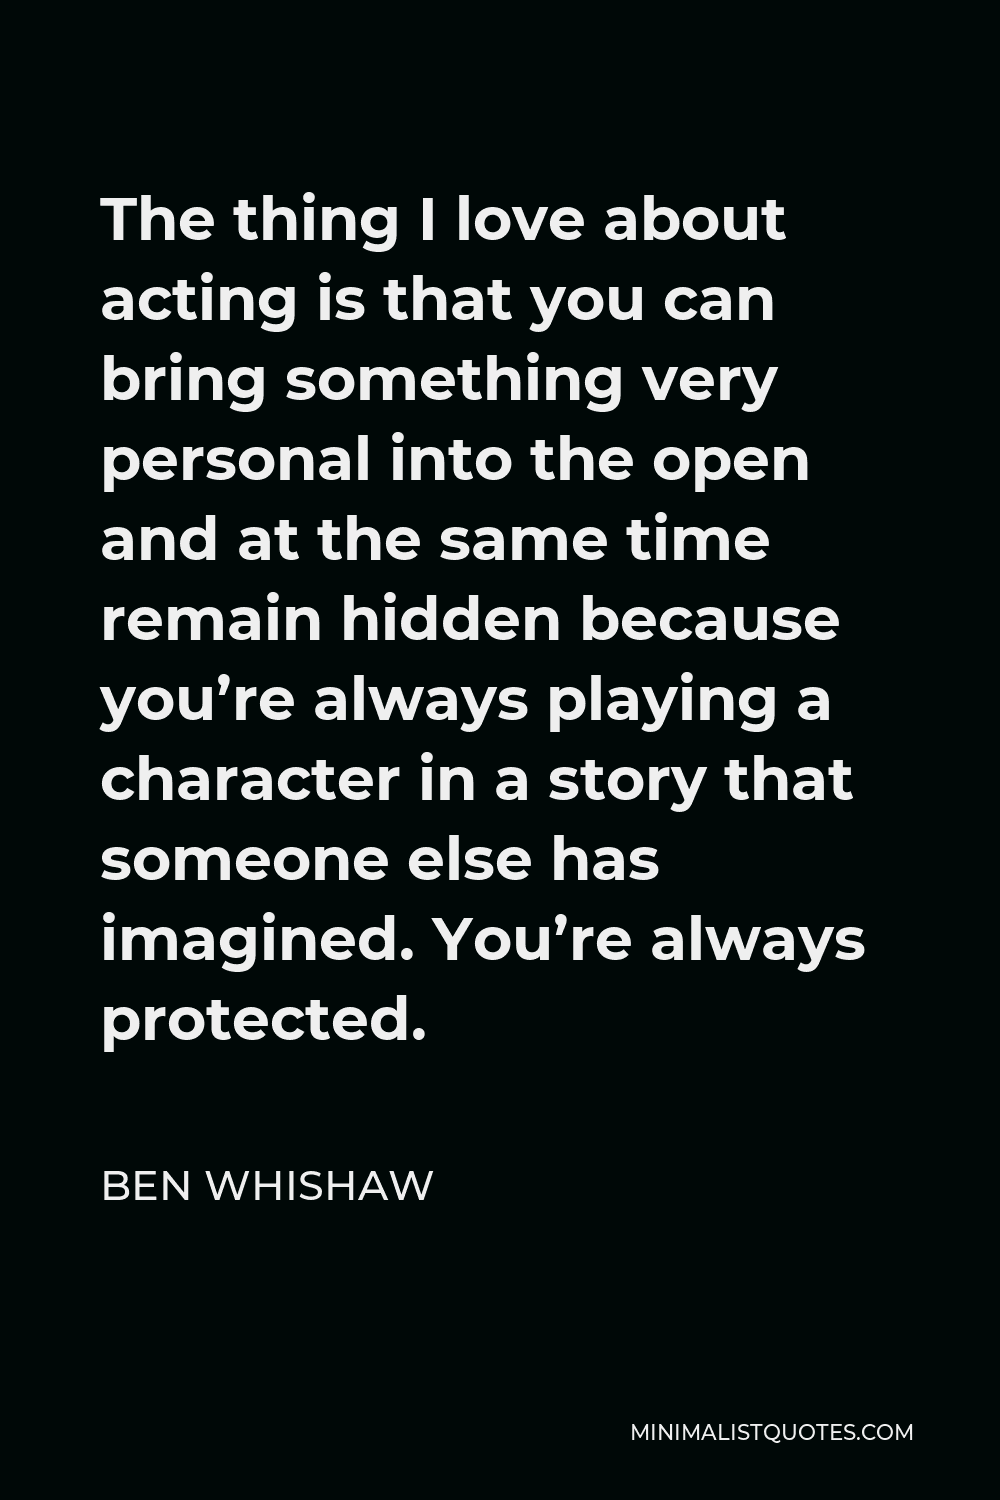 Ben Whishaw Quote - The thing I love about acting is that you can bring something very personal into the open and at the same time remain hidden because you’re always playing a character in a story that someone else has imagined. You’re always protected.